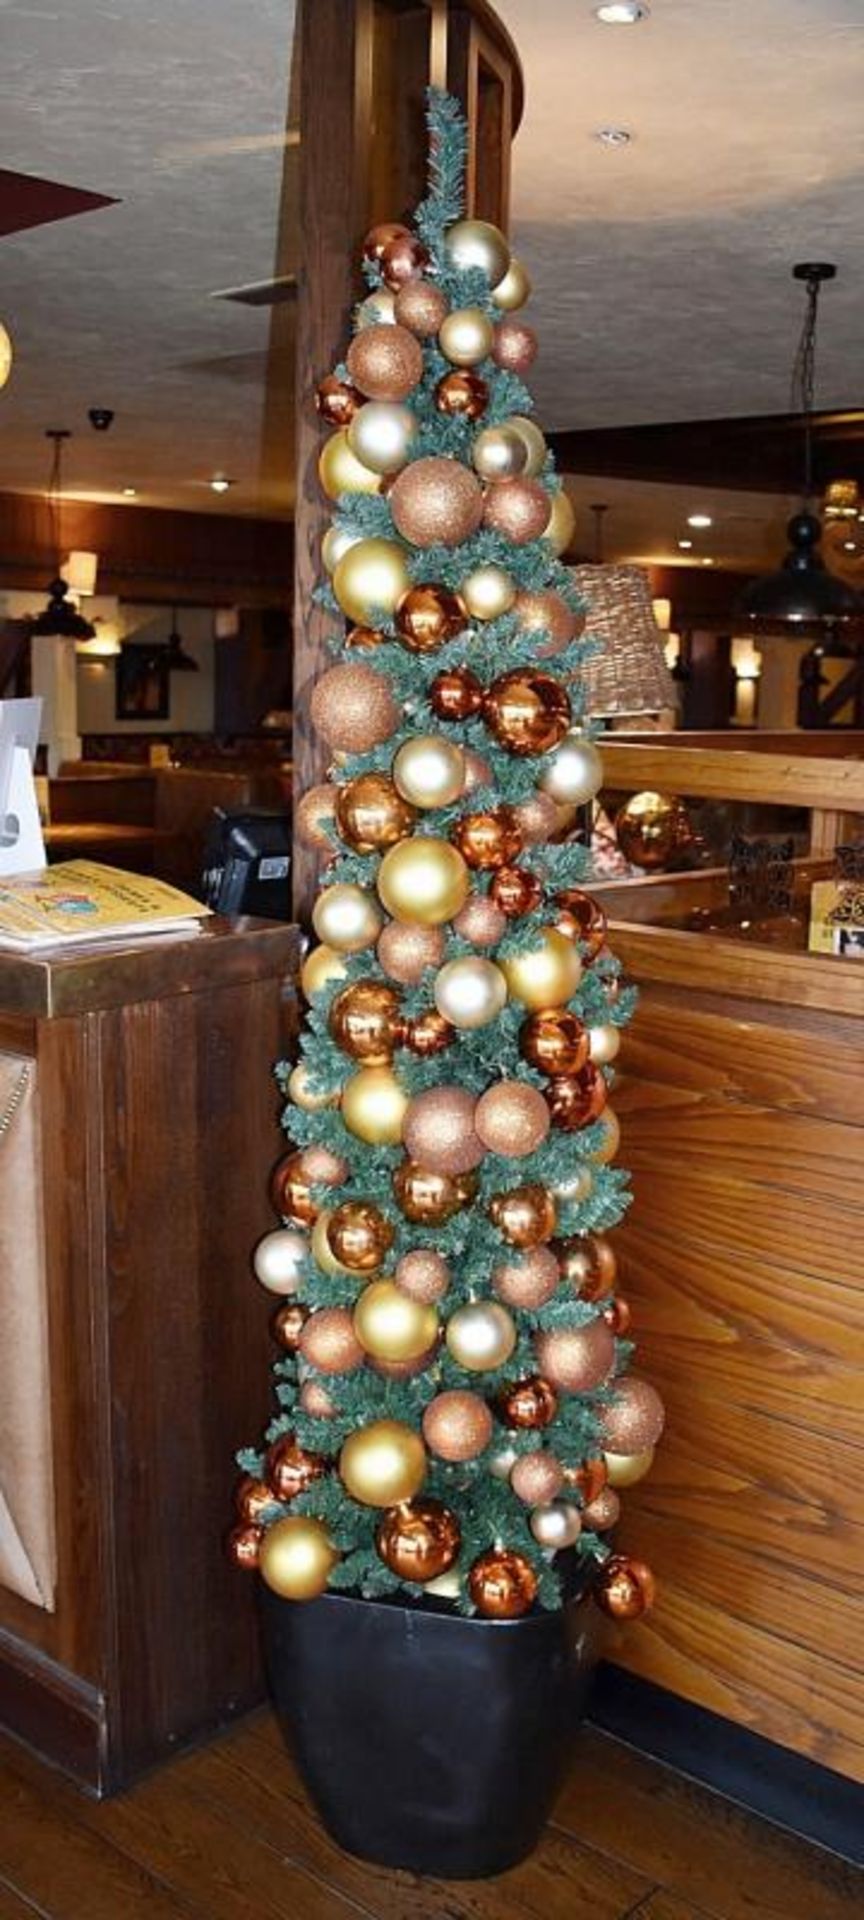 1 x Christmas Tree - Approx 6ft Tall With Decorations - CL461 - Location: London W3Please note